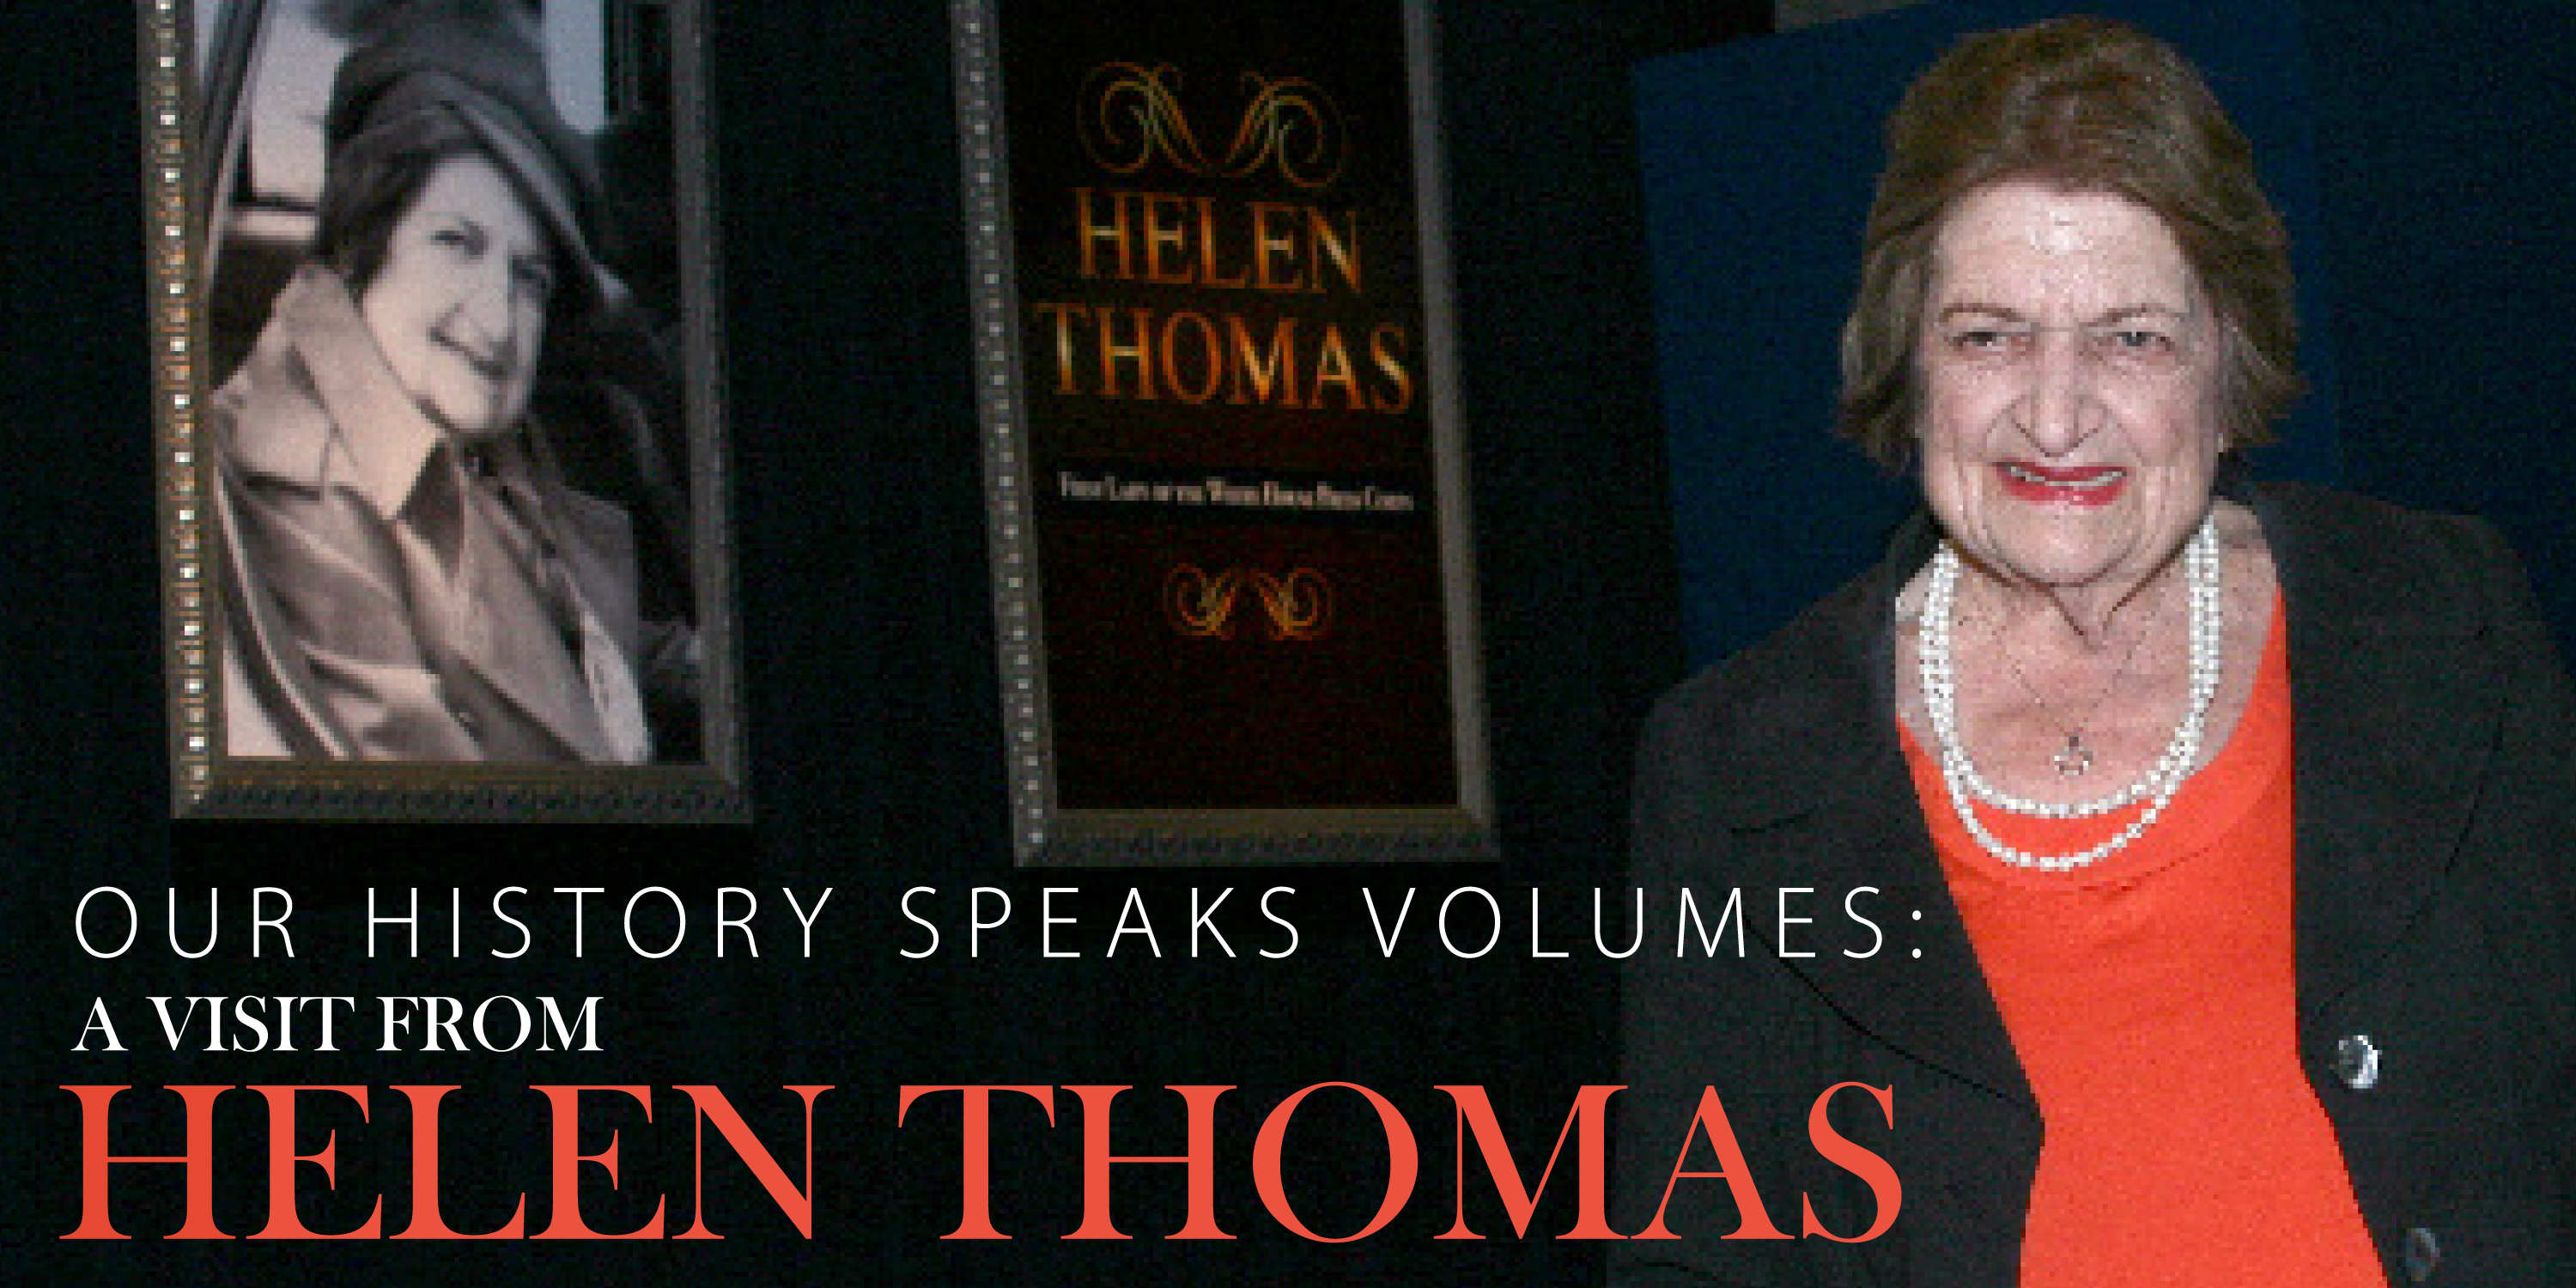 Our History Speaks Volumes: A Visit from Helen Thomas